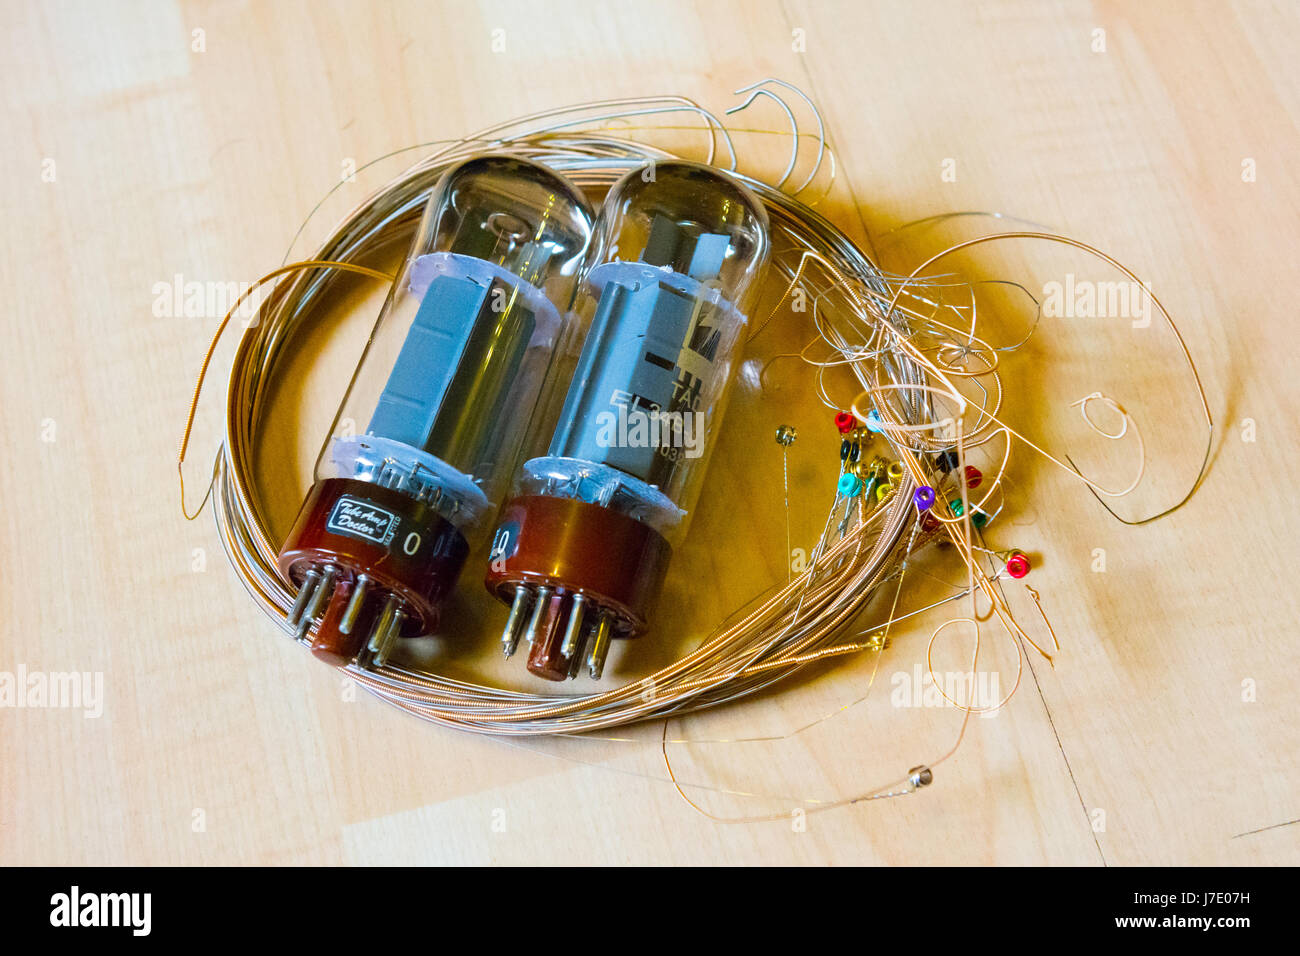 An assortment of used electric guitar strings and a pair of EL34B valves from a valve amplifier on a wooden surface. Stock Photo